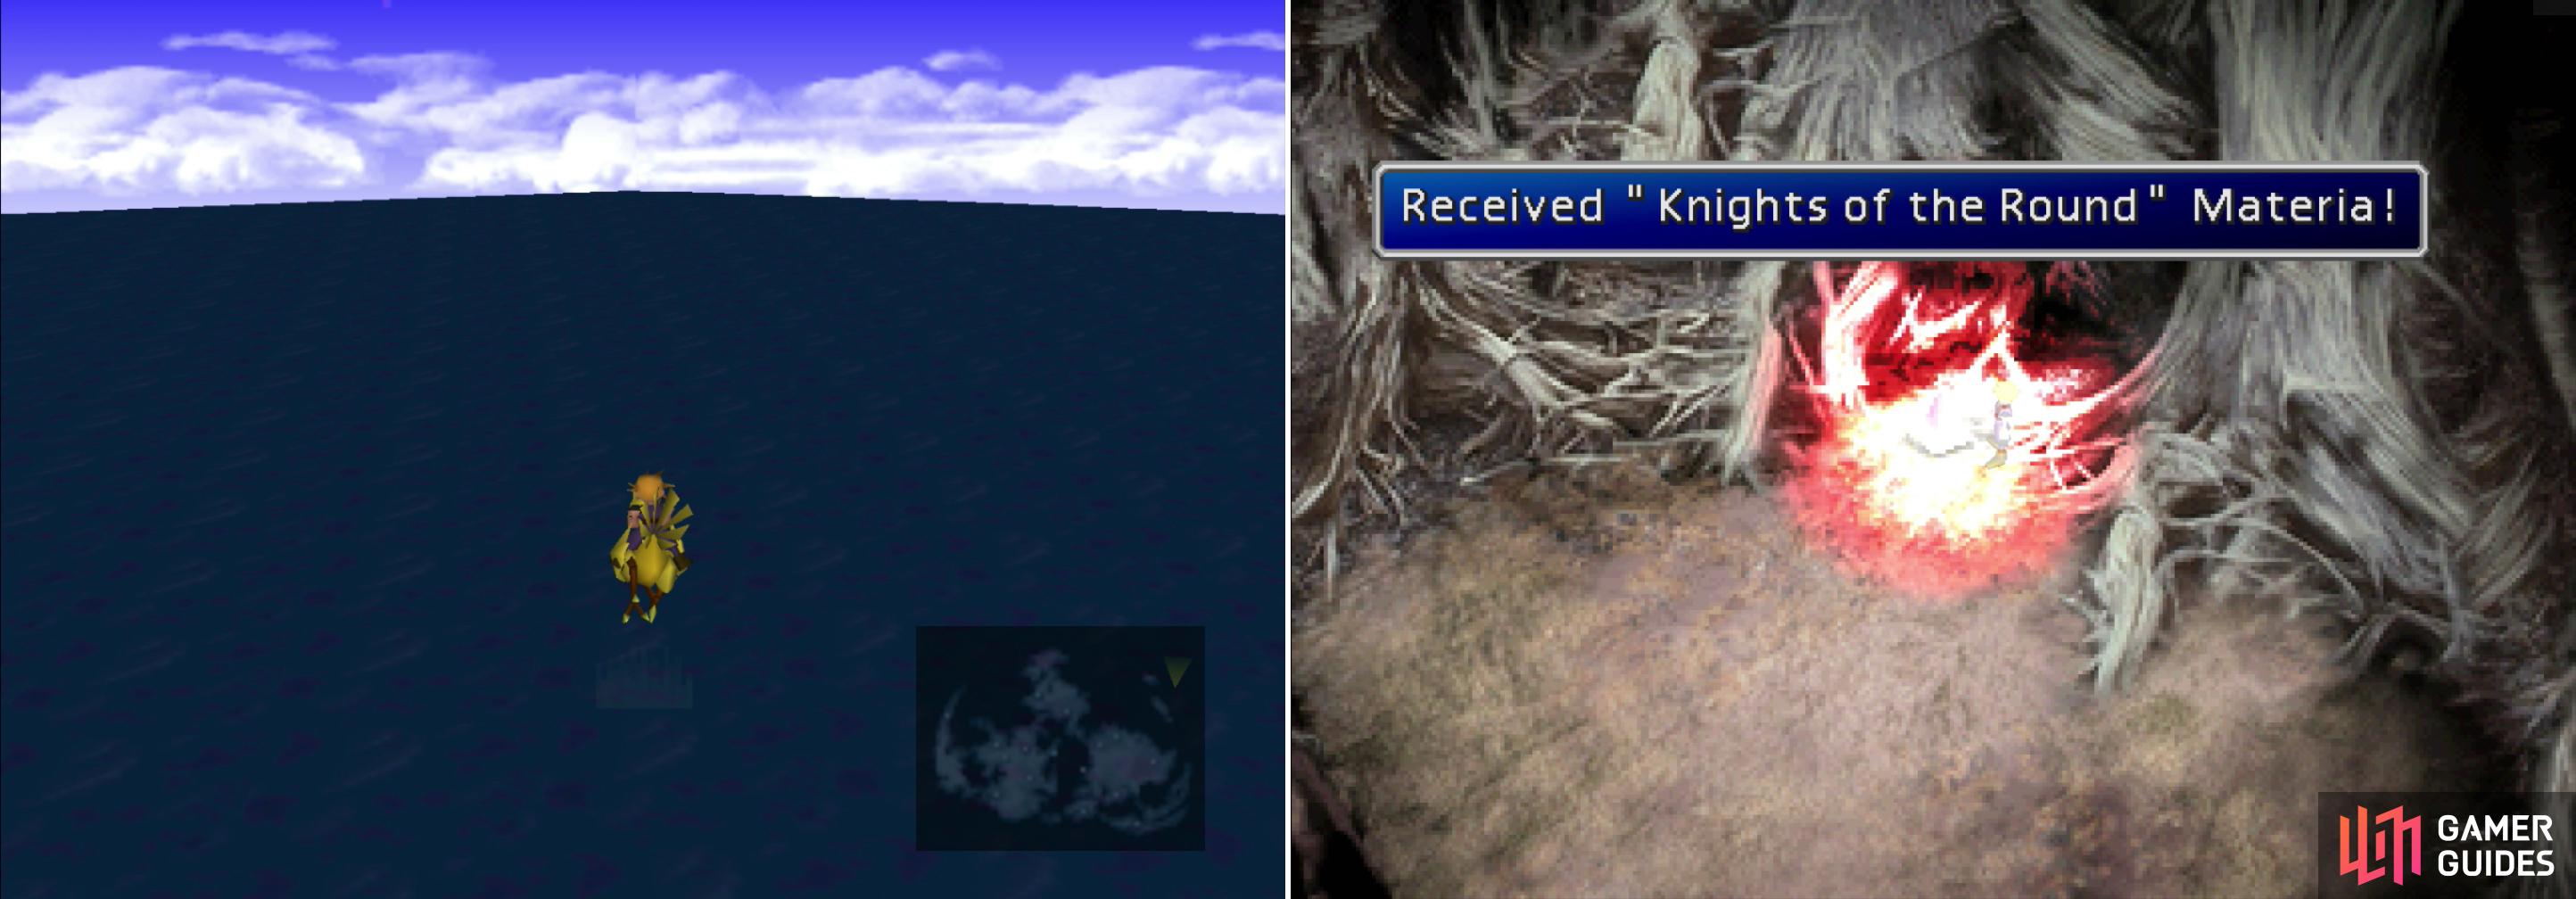 Breed a Black Chocobo and a Wonderful Chocobo to get a Gold Chocobo, which can cross oceans! (left) The Gold Chocobo is the only way to reach Round Island, where the Knights of the Round Materia can be found (right).